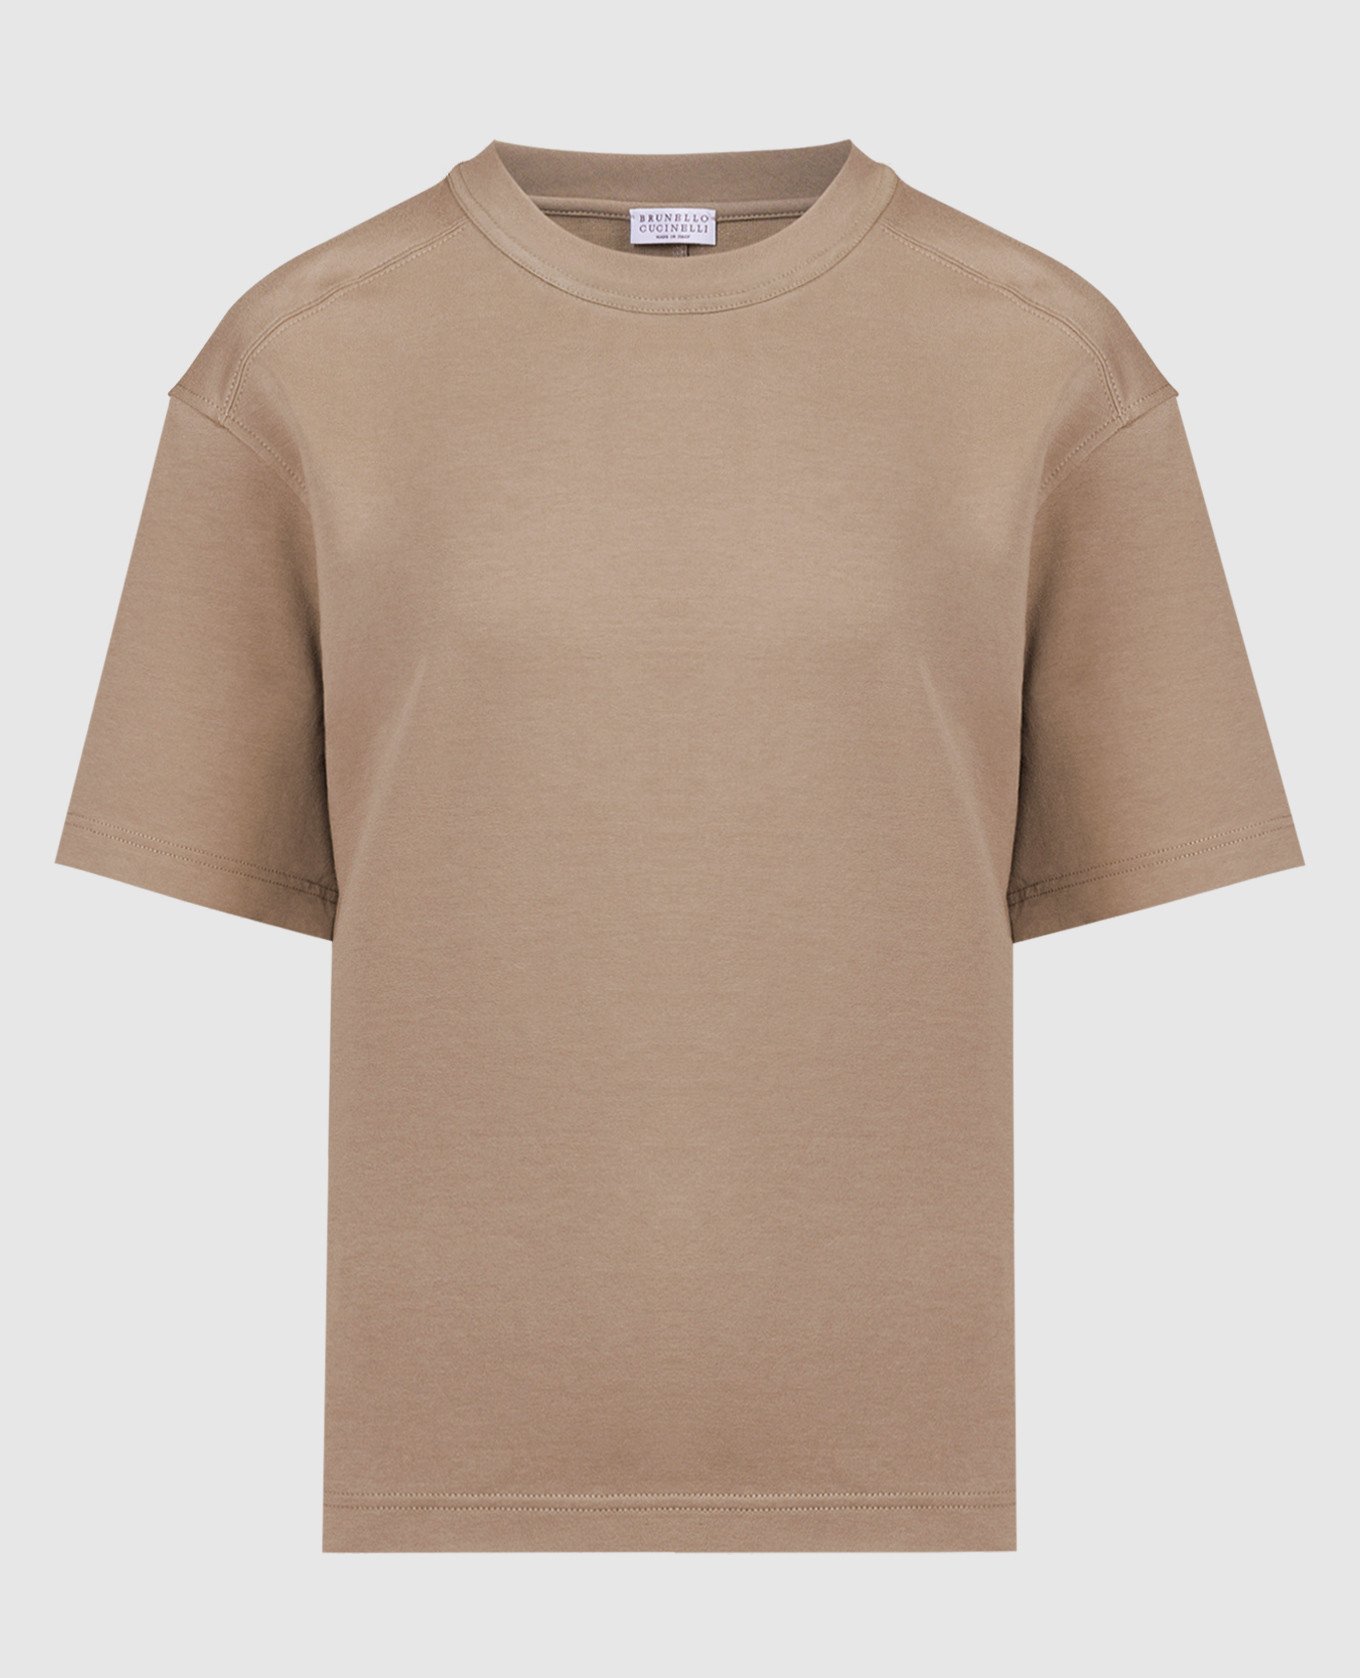 Brown t-shirt with monil chain made of ecolathuni